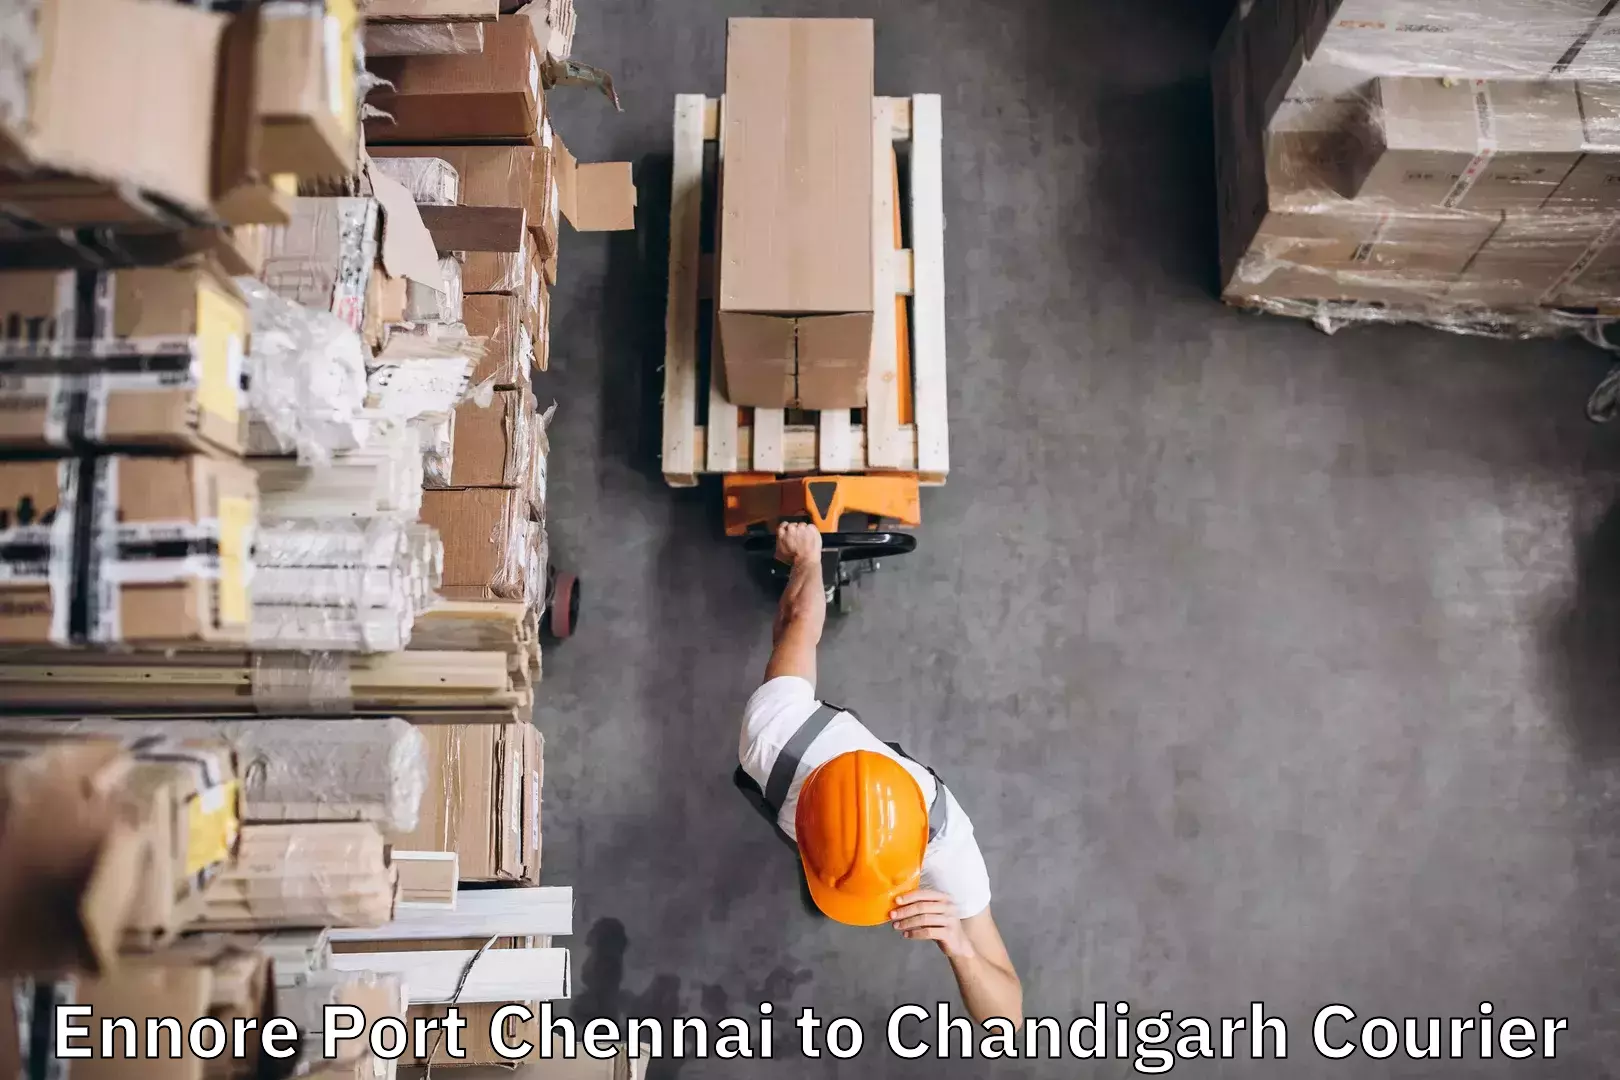 Baggage transport services Ennore Port Chennai to Chandigarh